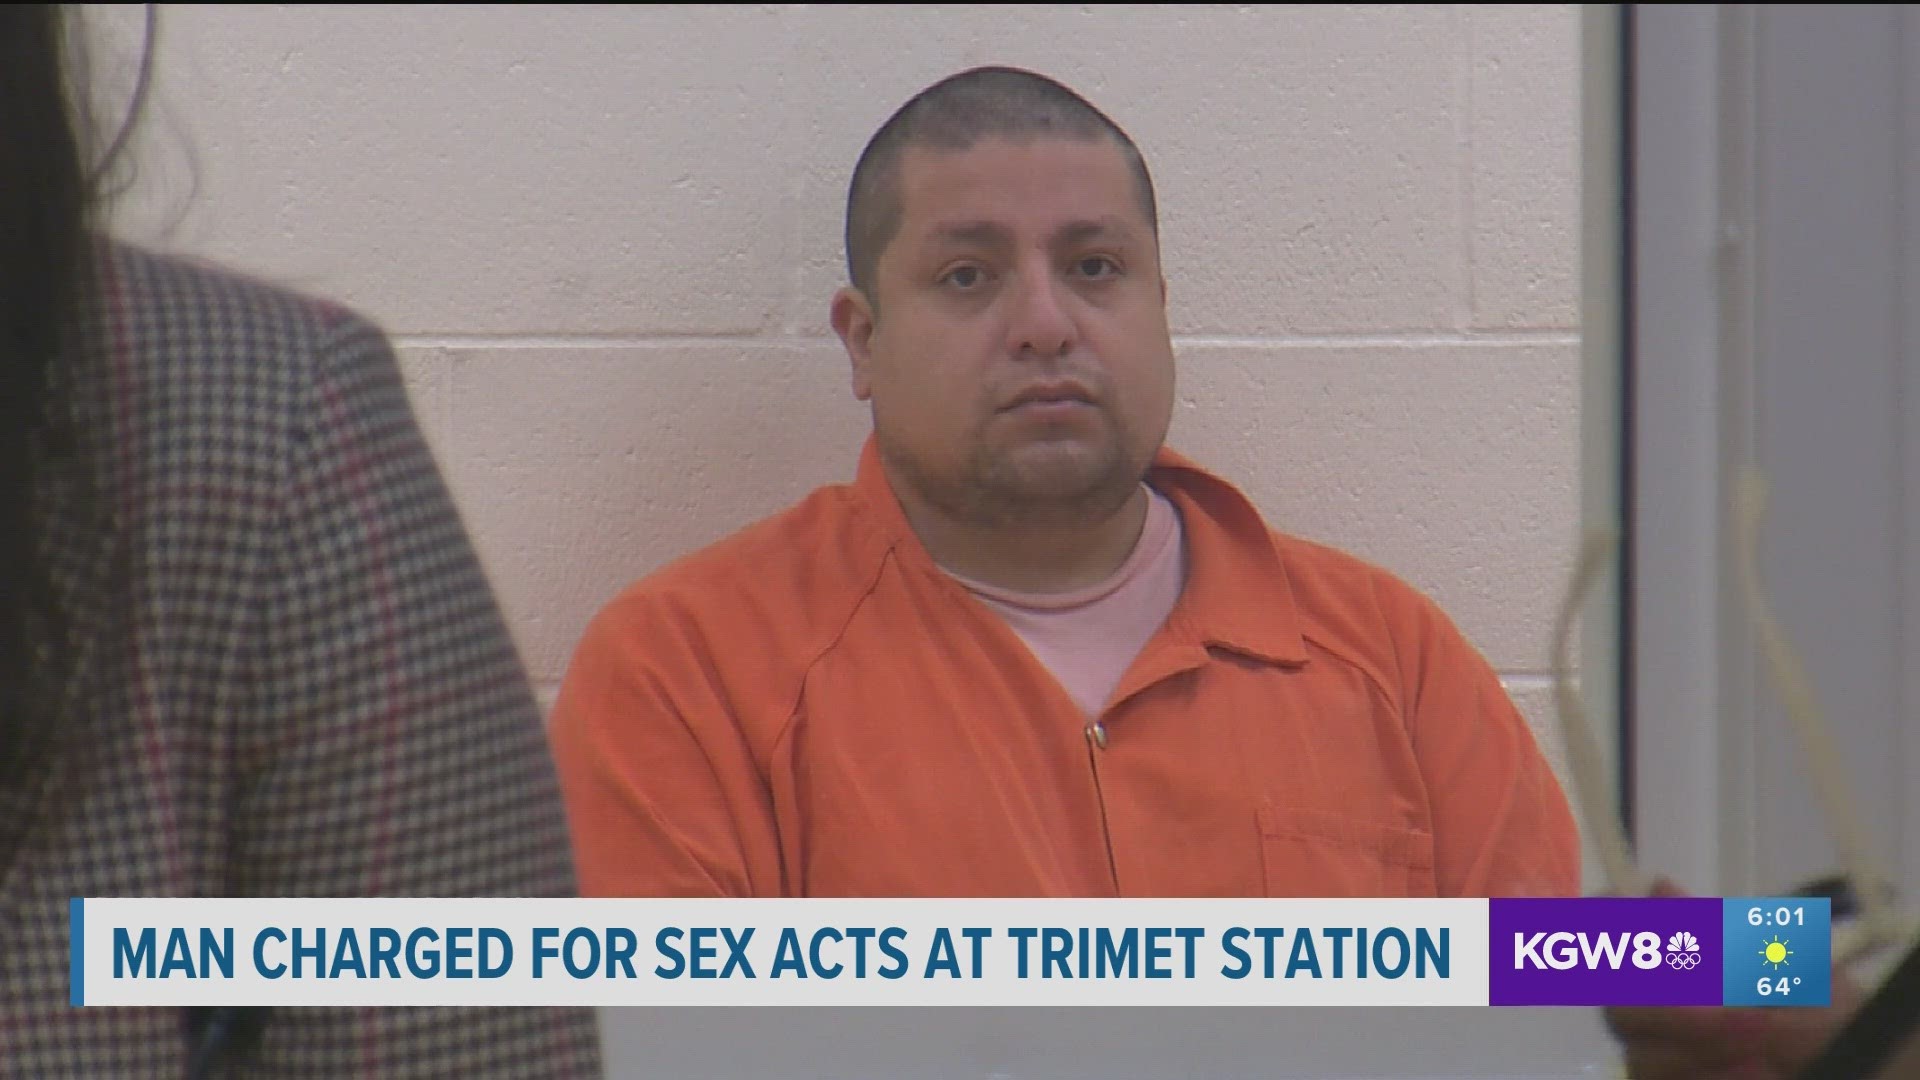 Eduardo Madrid-Roque is facing ten felony charges after prosecutors said he sexually assaulted a 63-year-old woman at the Hillsboro Transit Center.